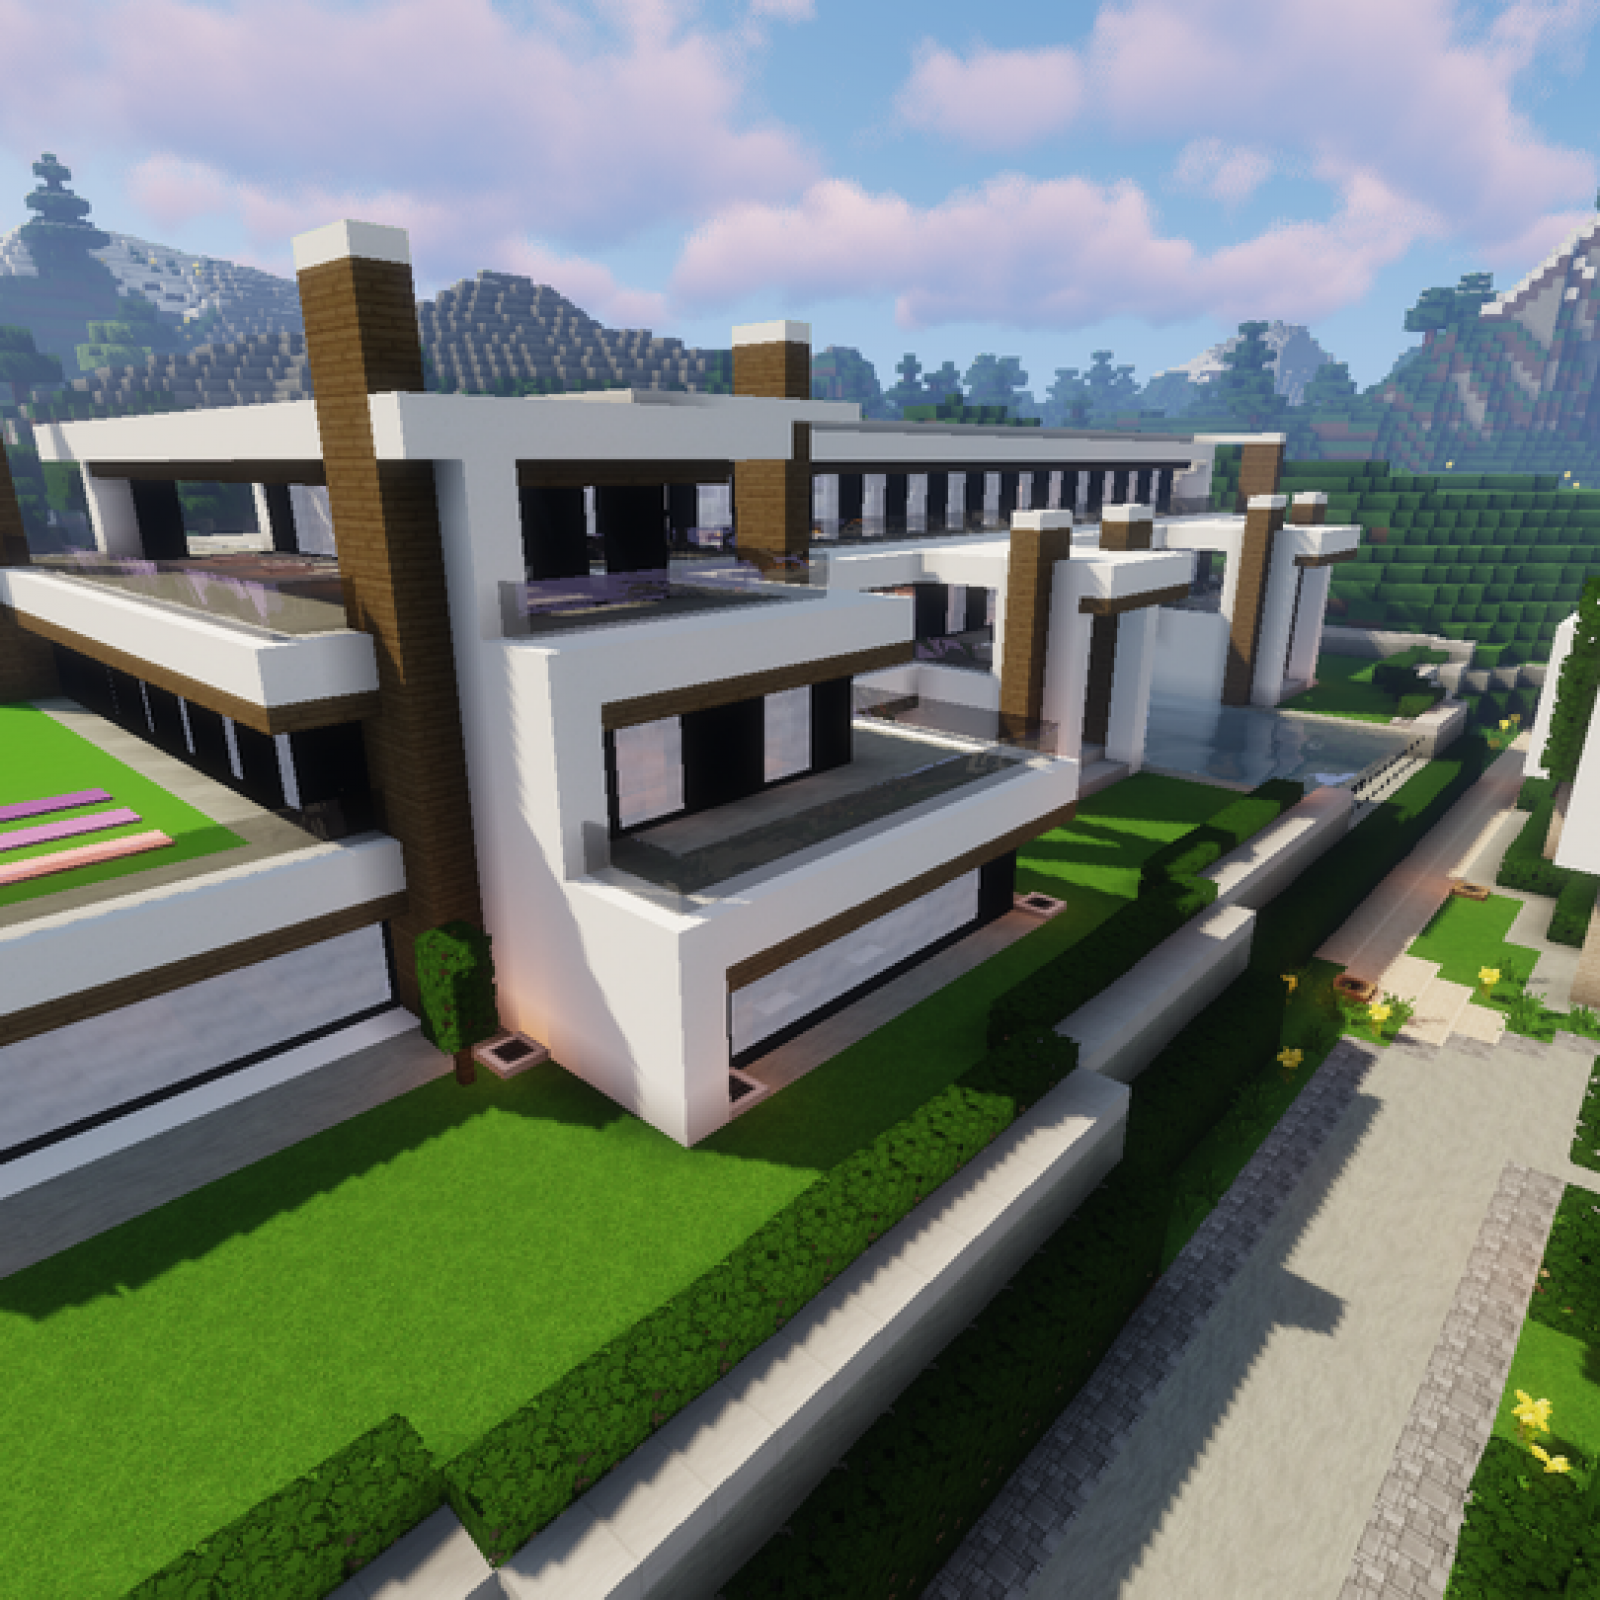 Modern Minecraft Houses 10 Building Ideas To Stoke Your Imagination